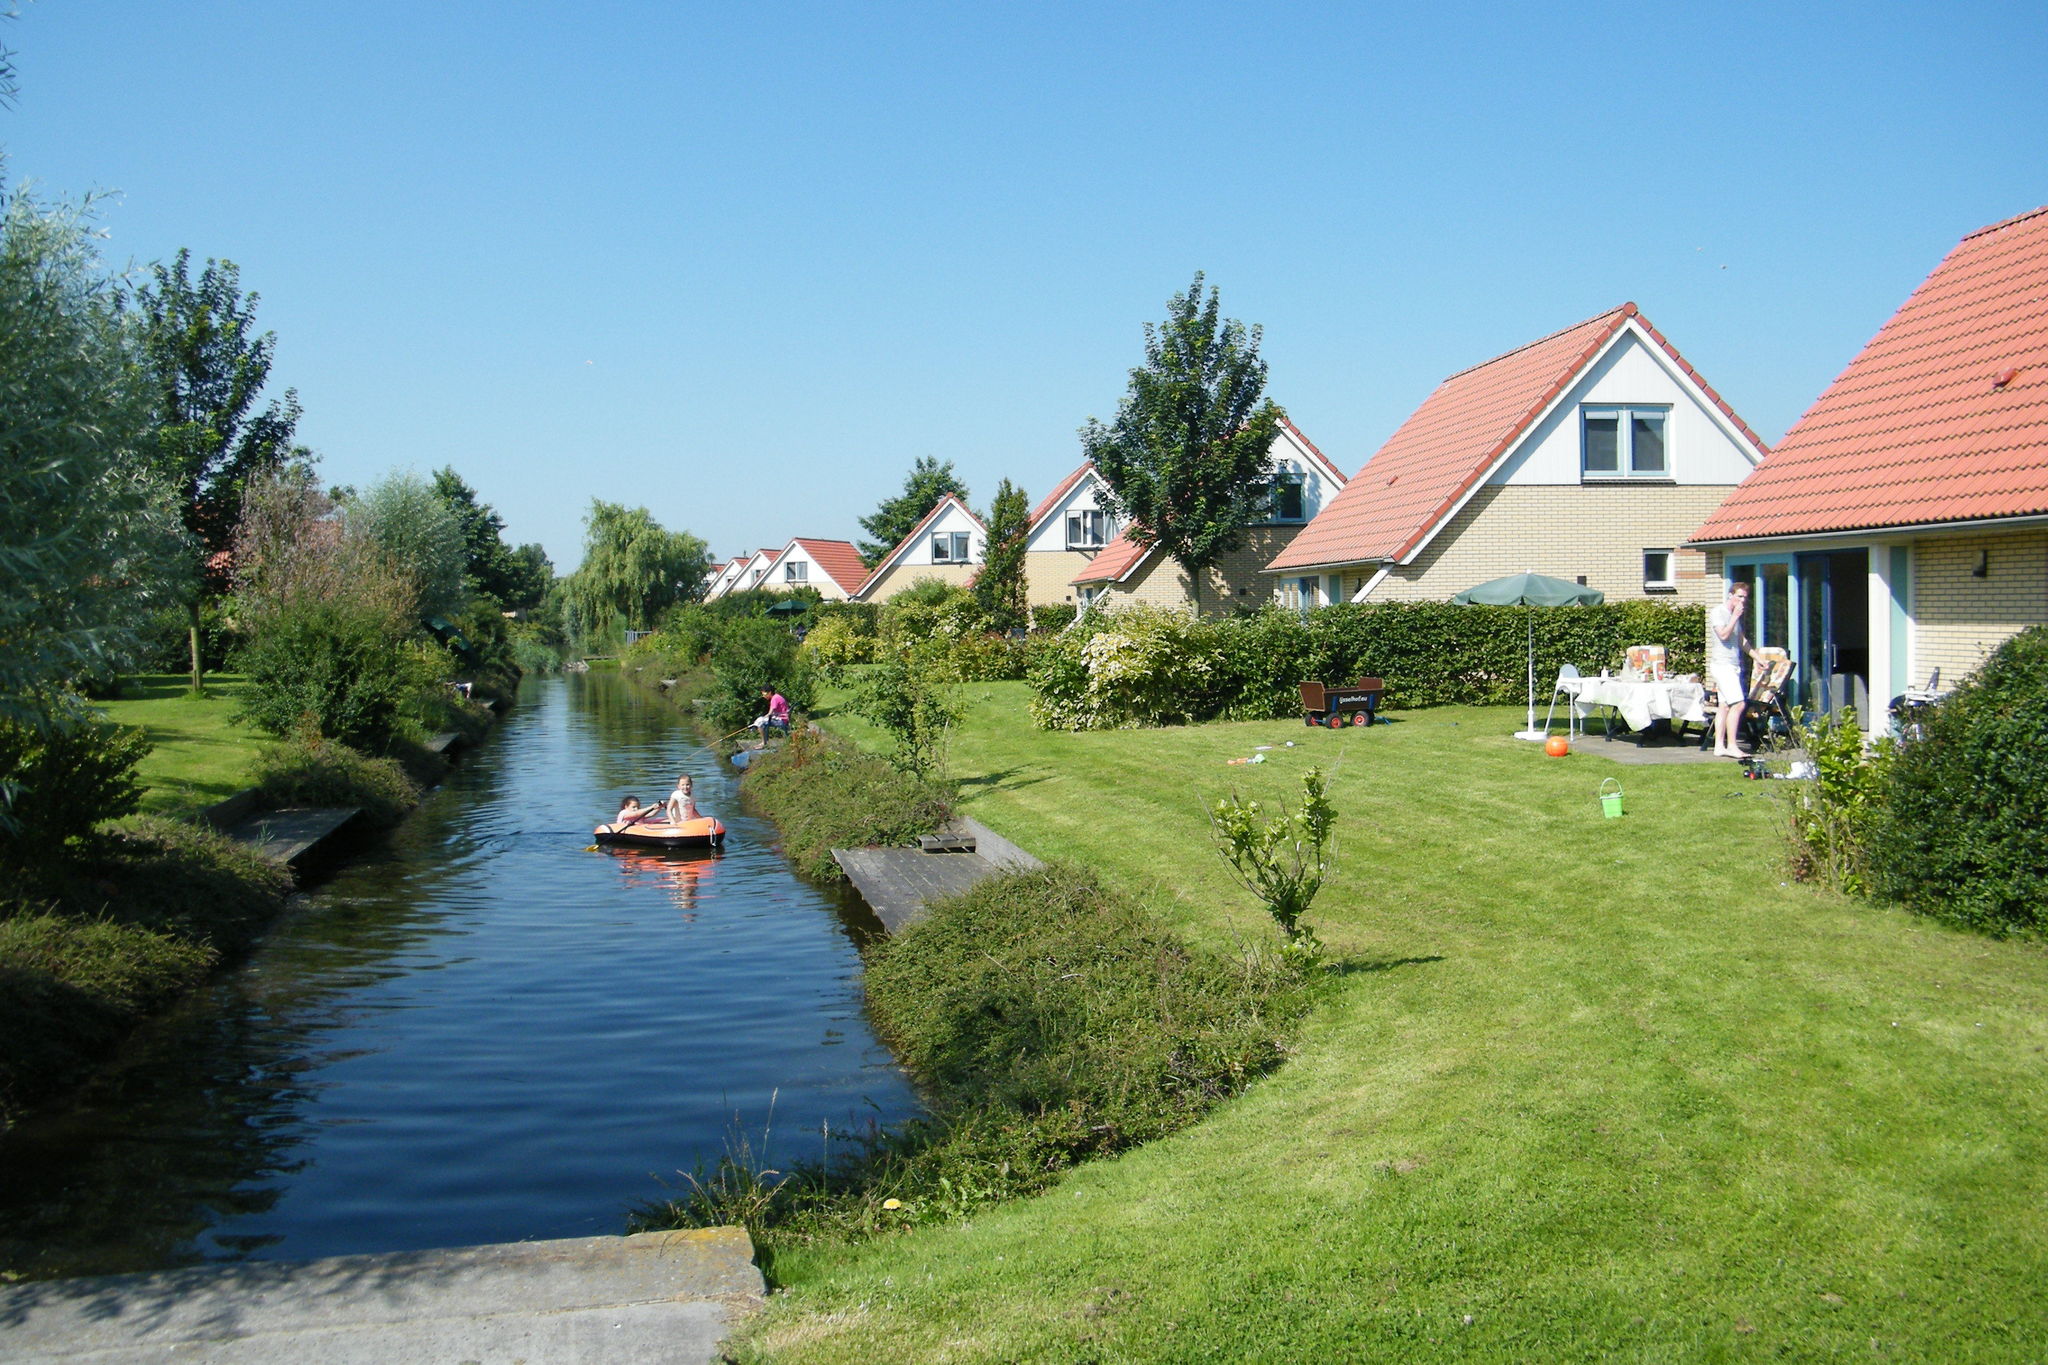 House with dishwasher, 19 km. from Hoorn